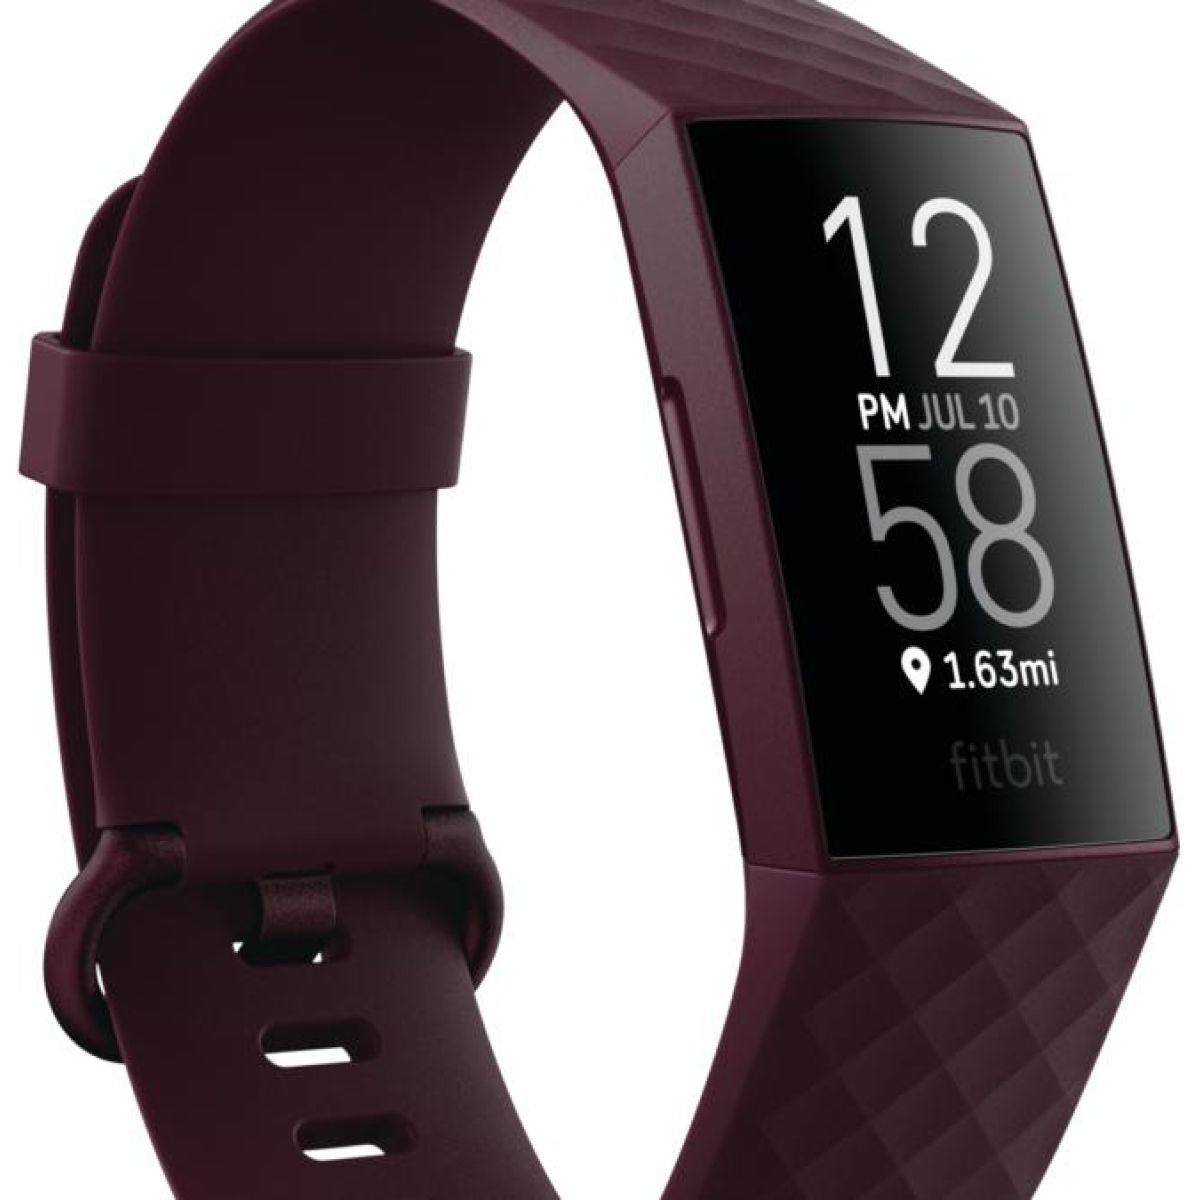 Fitbit releases Charge 4 ahead of 